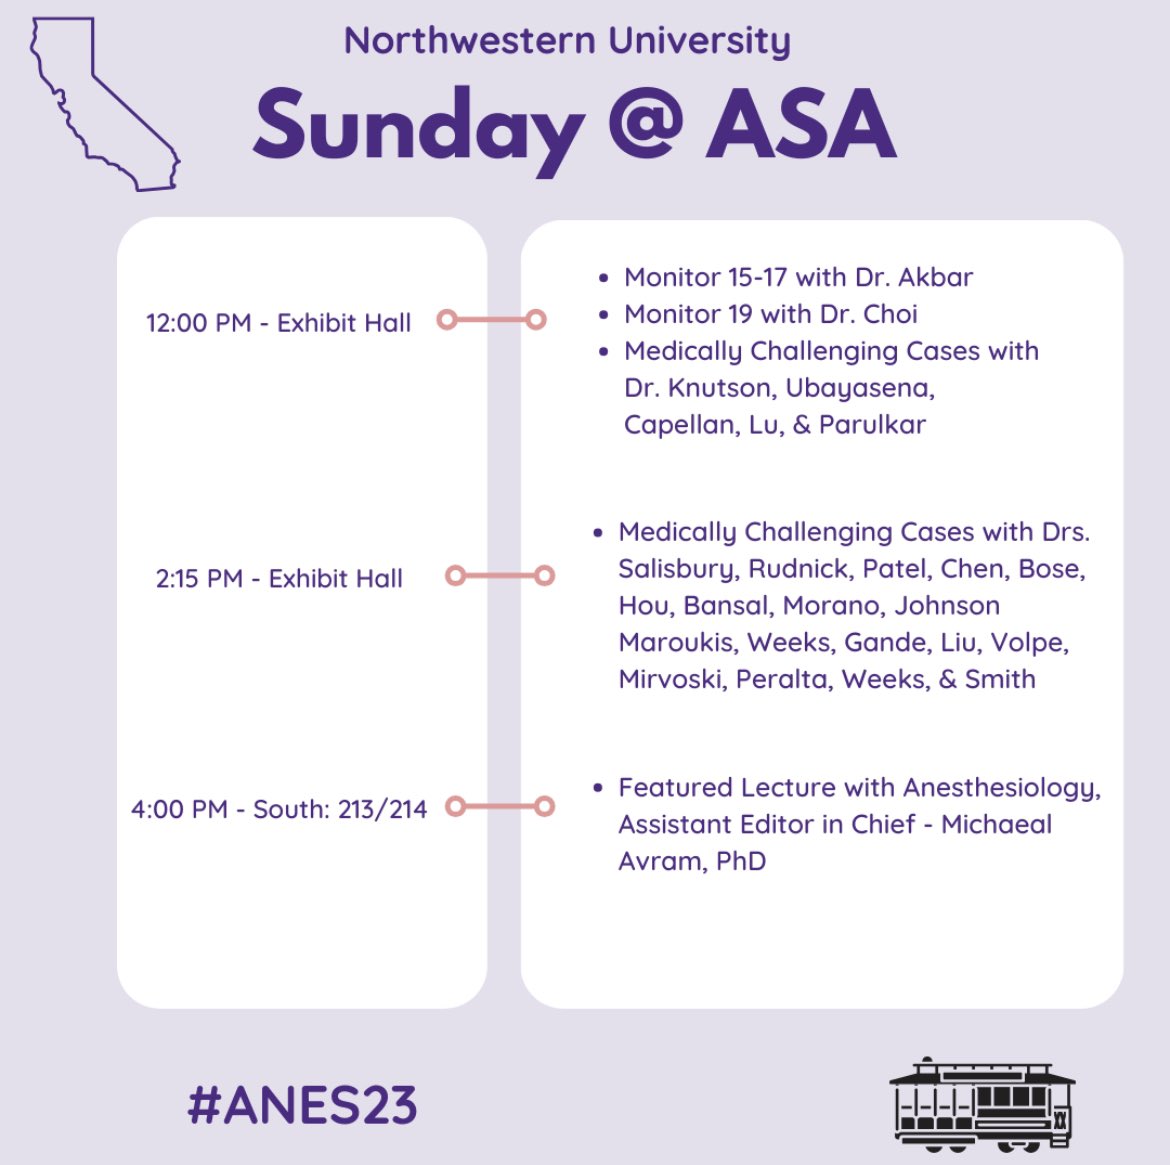 Fabulous start to #ANES23 yesterday! We loved seeing so many of our Northwestern Anesthesiology alumni & current attendees last night! Busy Sunday schedule today! Come say hello! @ASALifeline @northwesternmedicine @nuanesthesiares